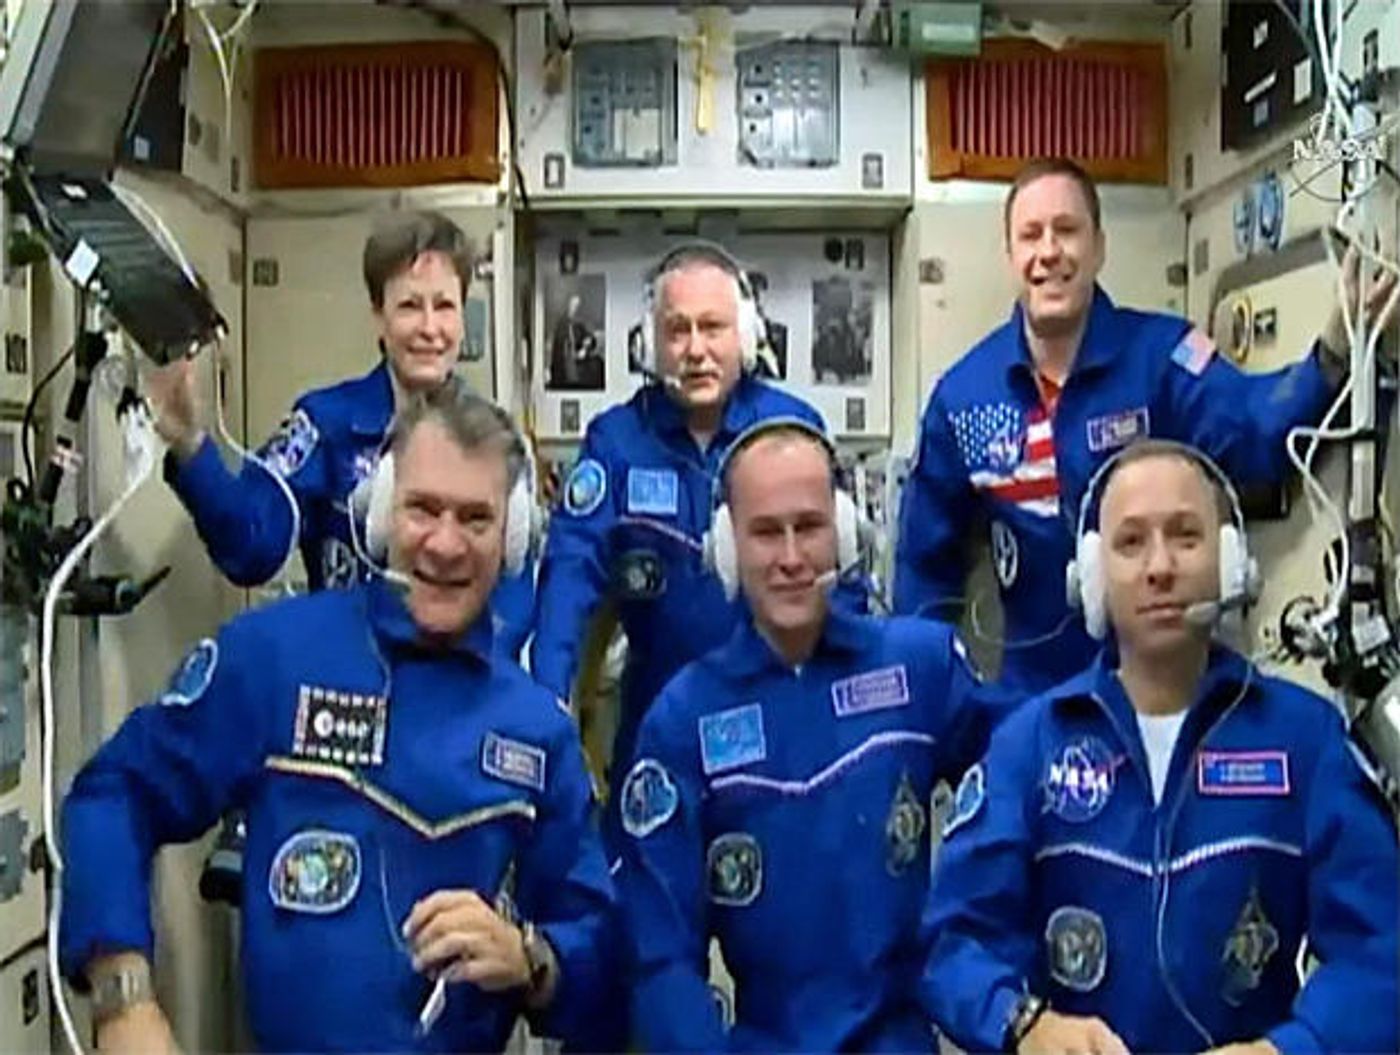 A group photo of the new and old astronauts/cosmonauts after the Soyuz spacecraft safely delivered three more men on Friday.